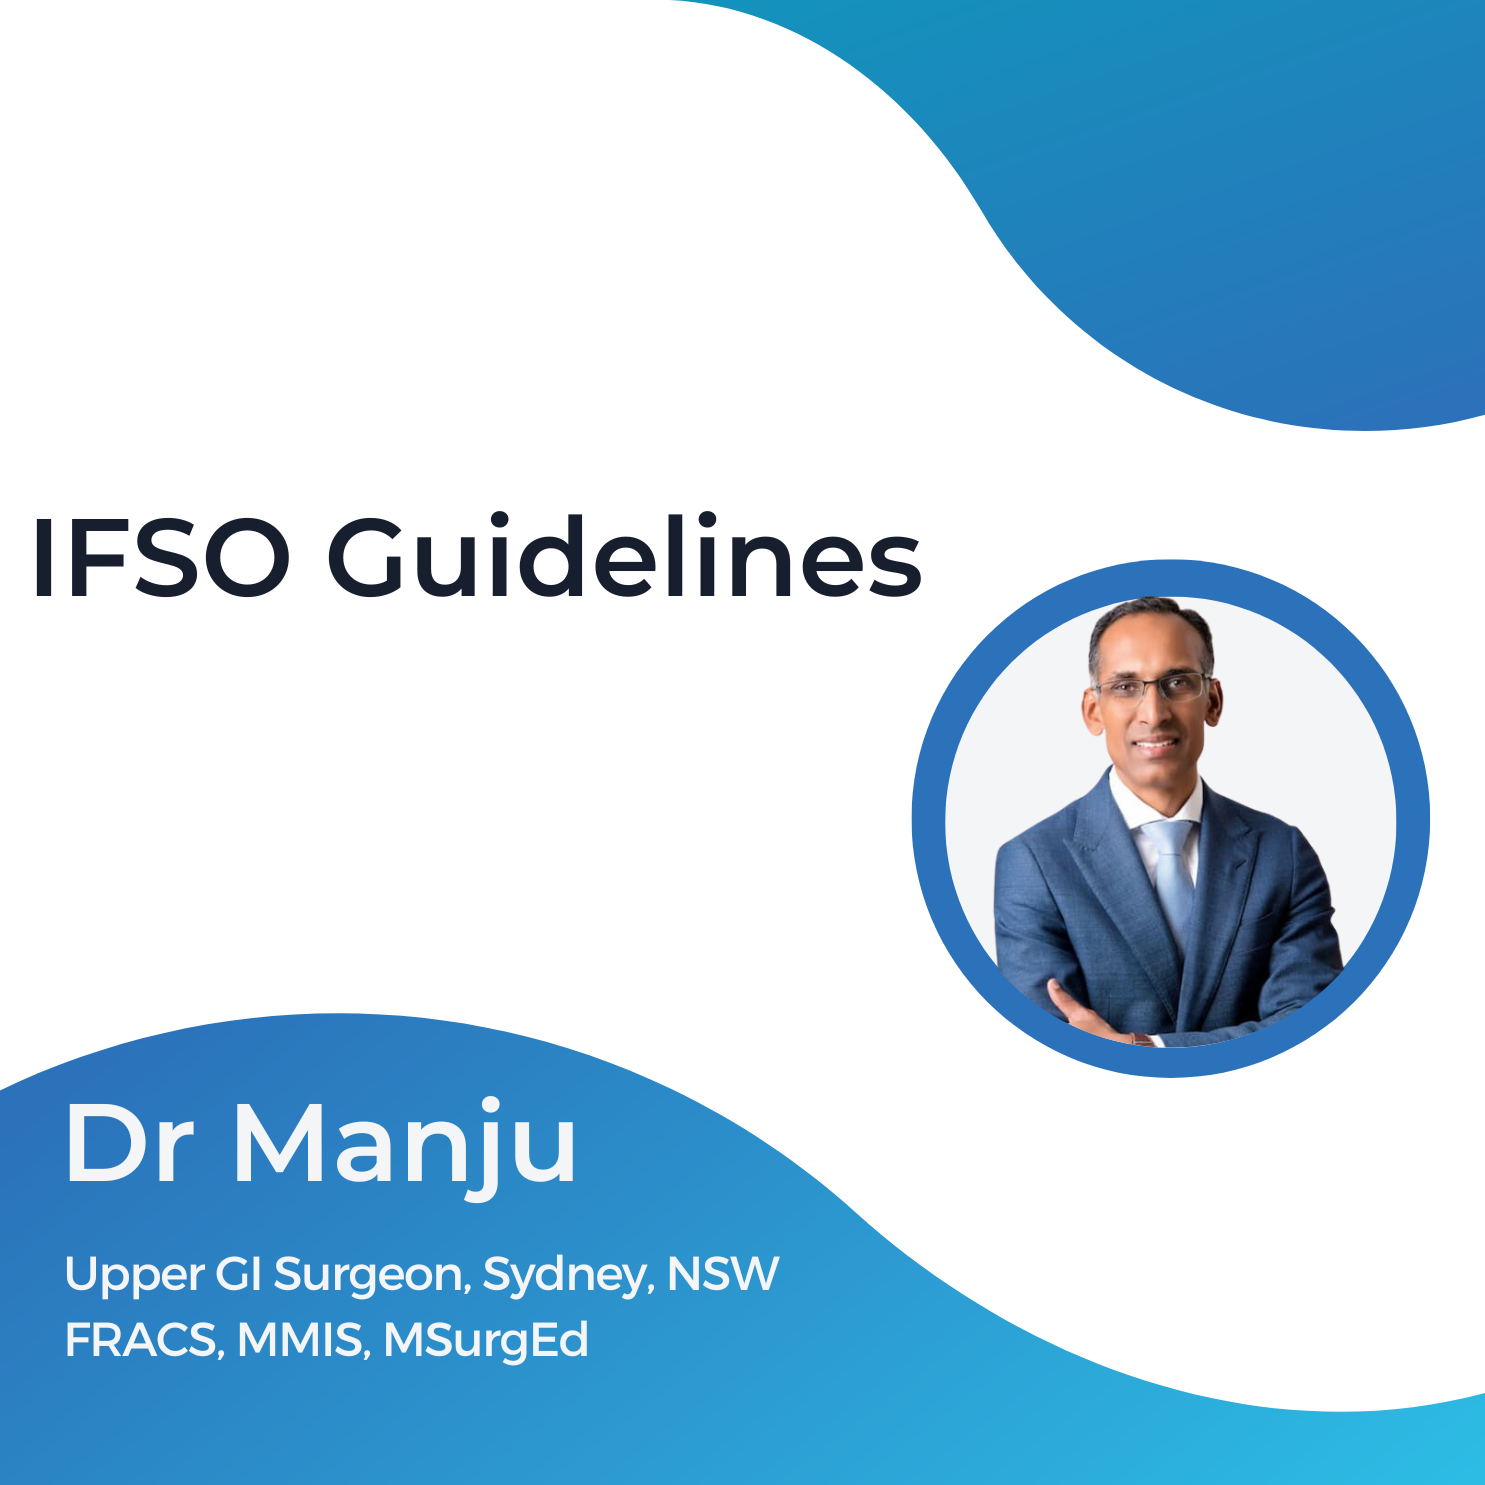 IFSO Guidelines 2022 Presentation Video